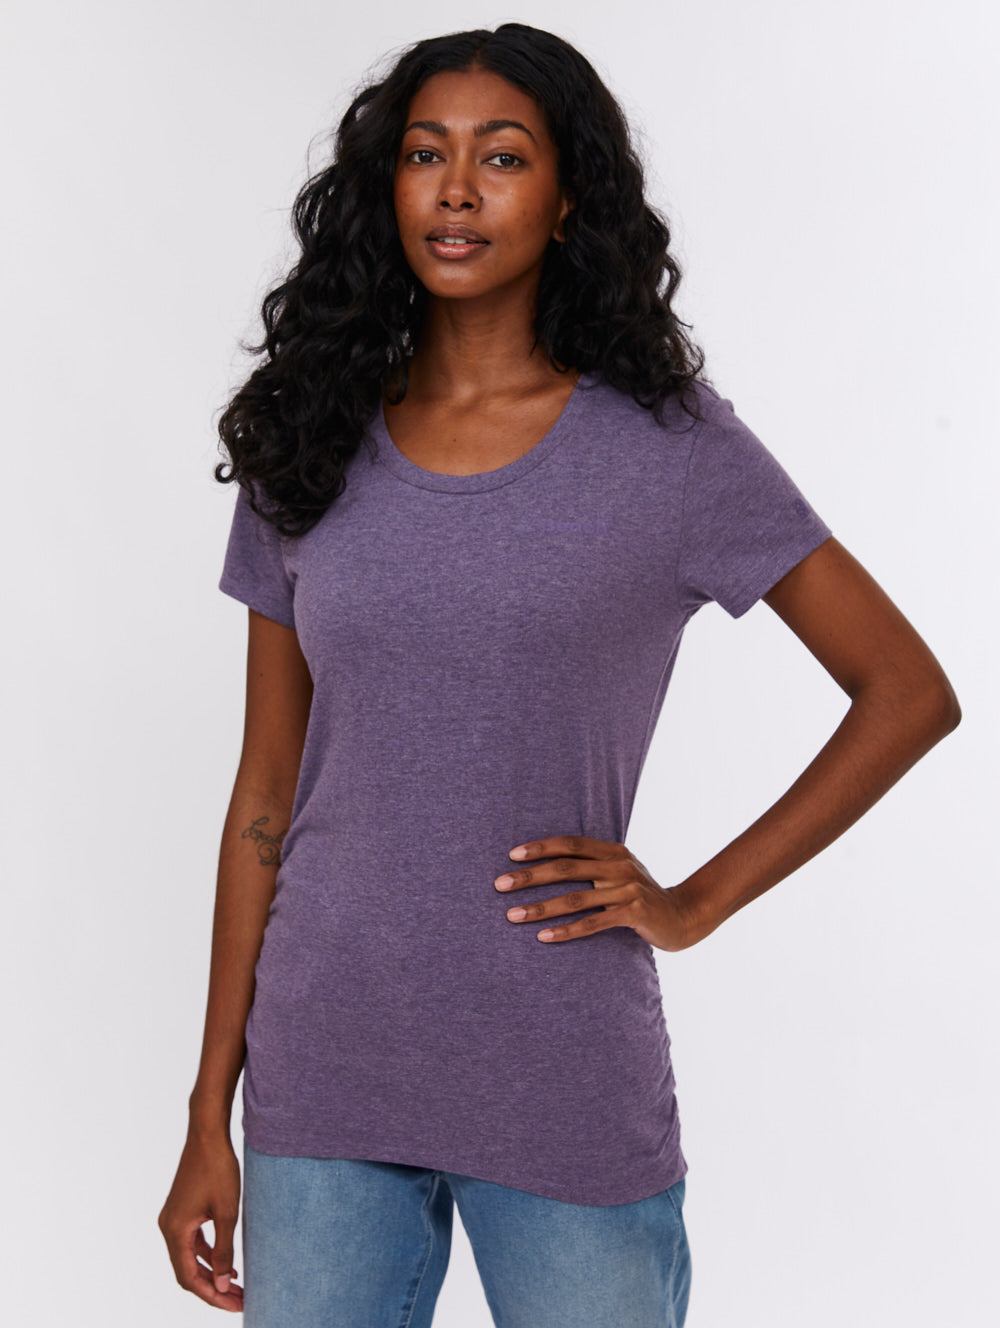 Ruched Tee - BLGH12008C